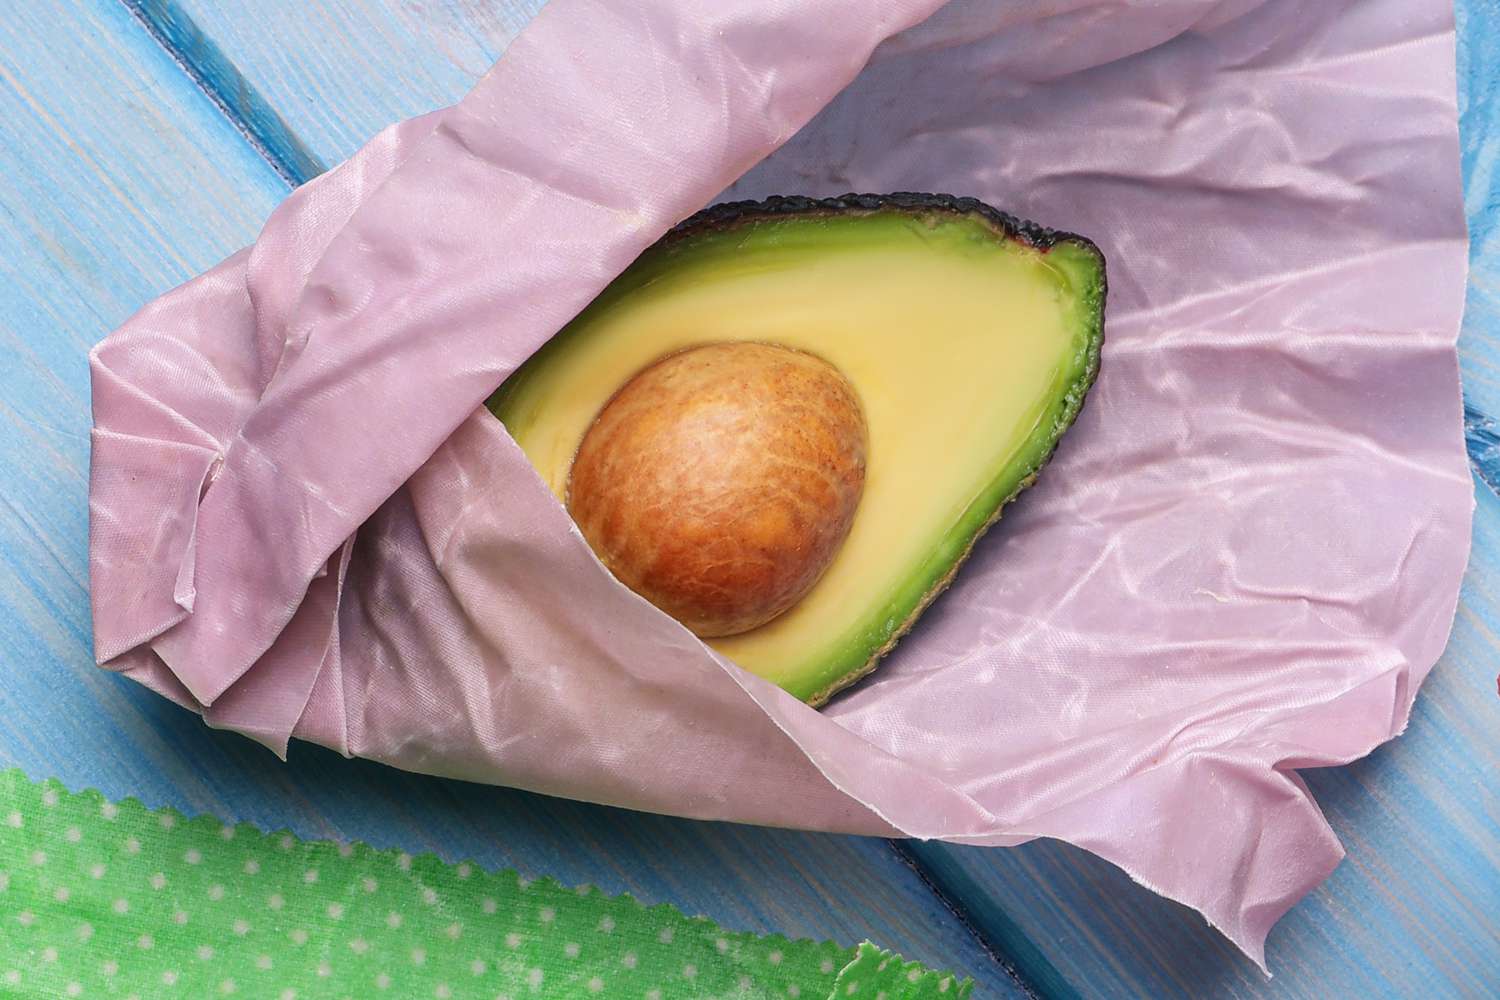 How To Store Unripe Avocados Long-Term